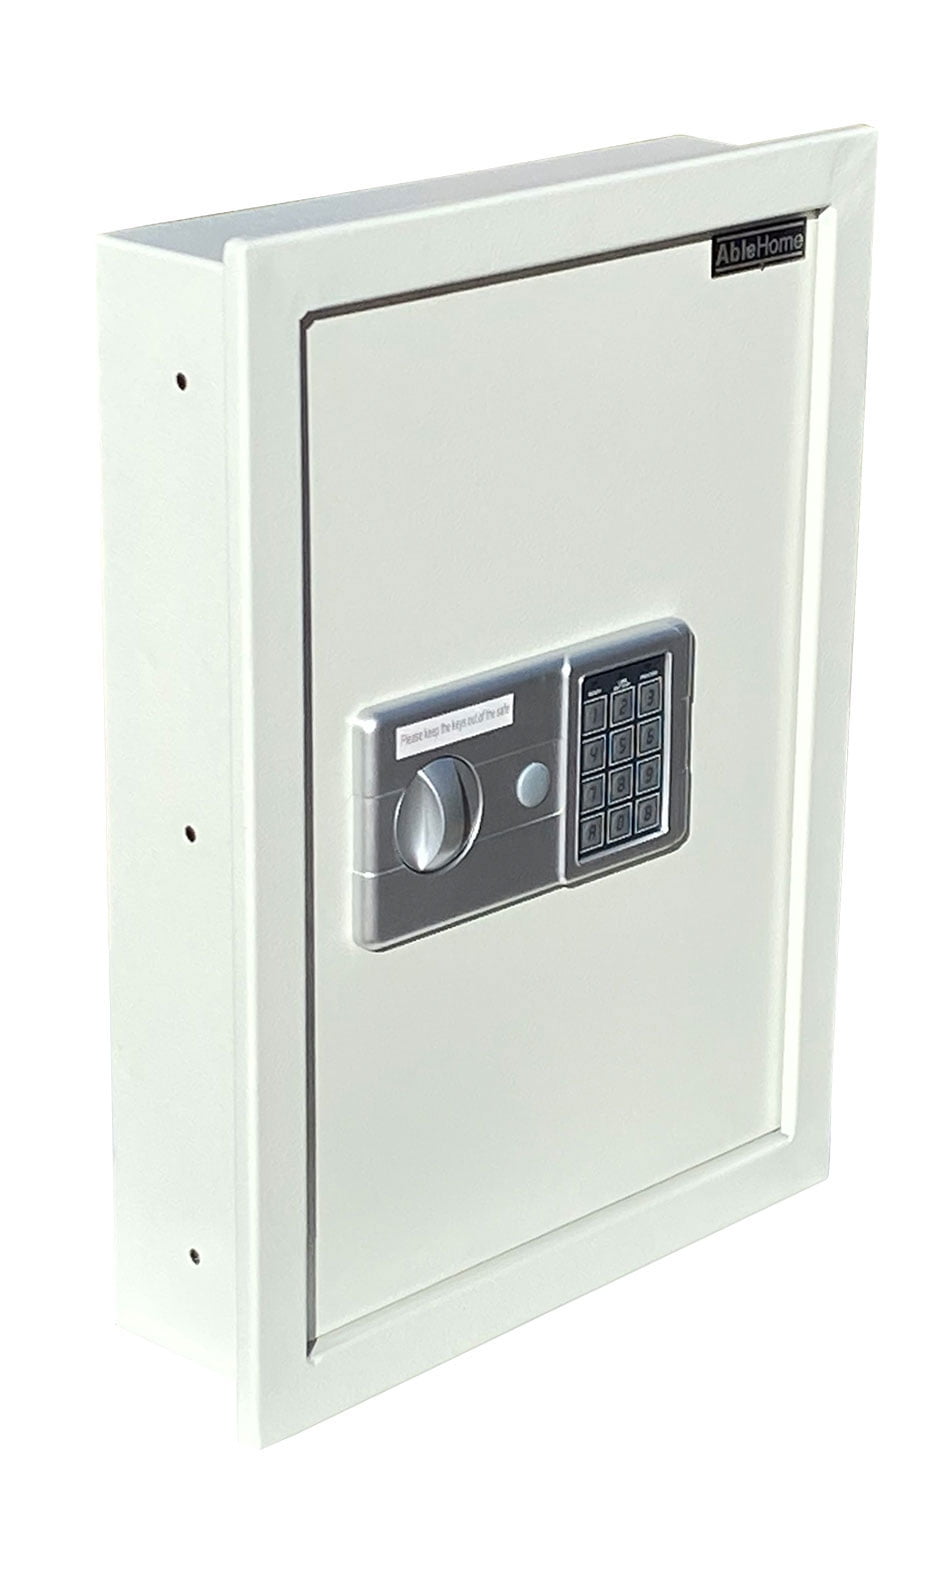 S AFSTAR Digital Wall Safe, Built-in Wall Safes, Flat Recessed Wall Hidden  Safe Security Box, Concealed Wall Safe Between The Studs for Jewelry Gun